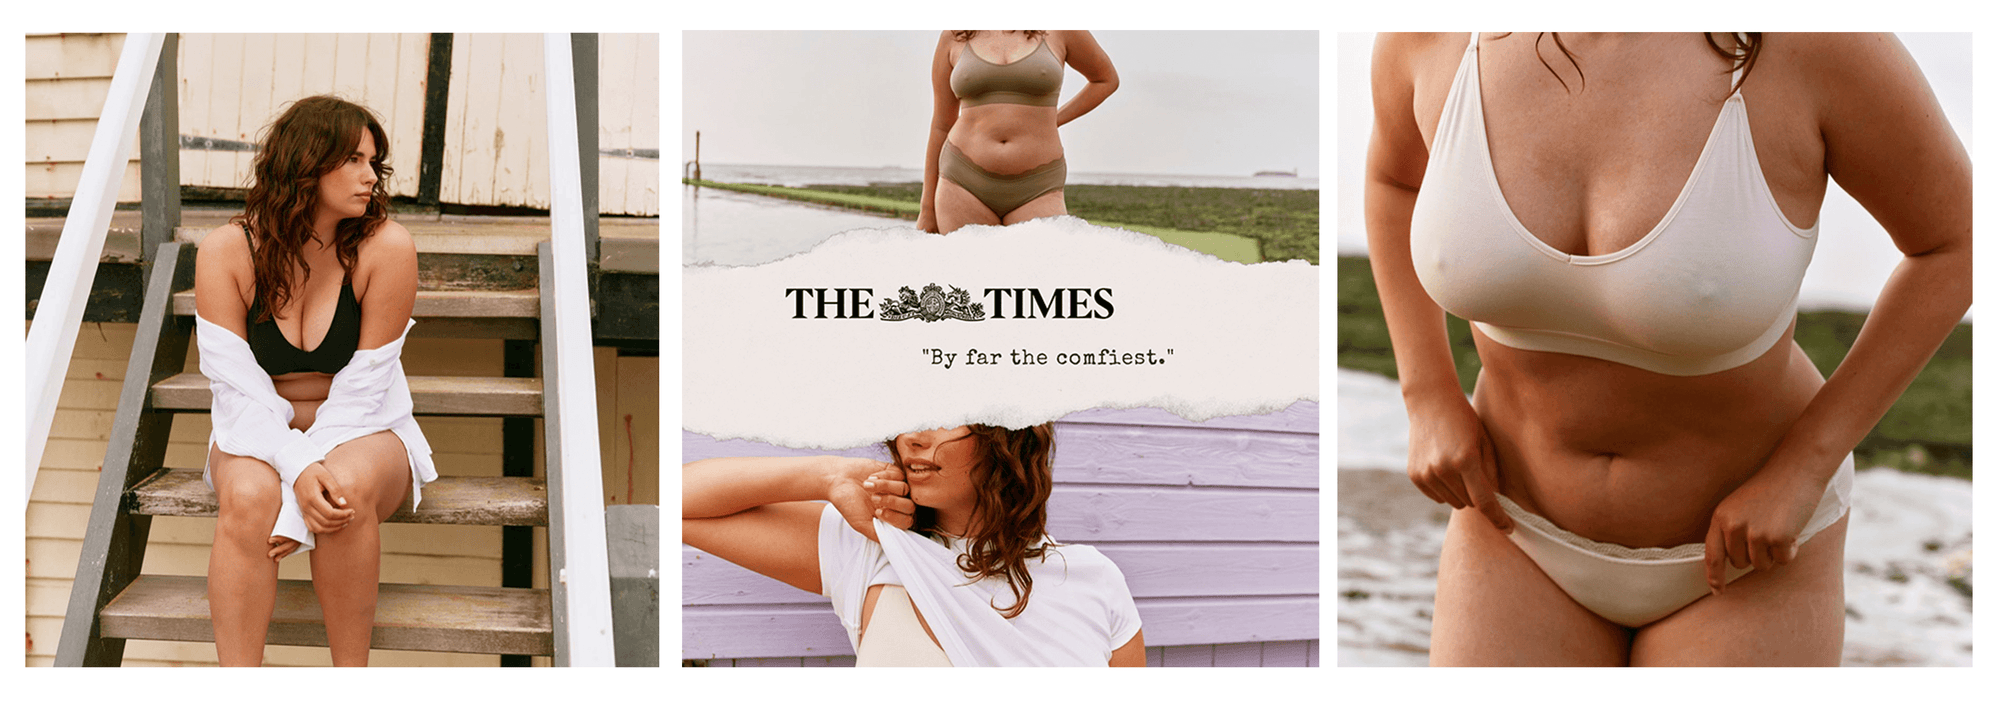 woman wearing underwear at beach with times quote